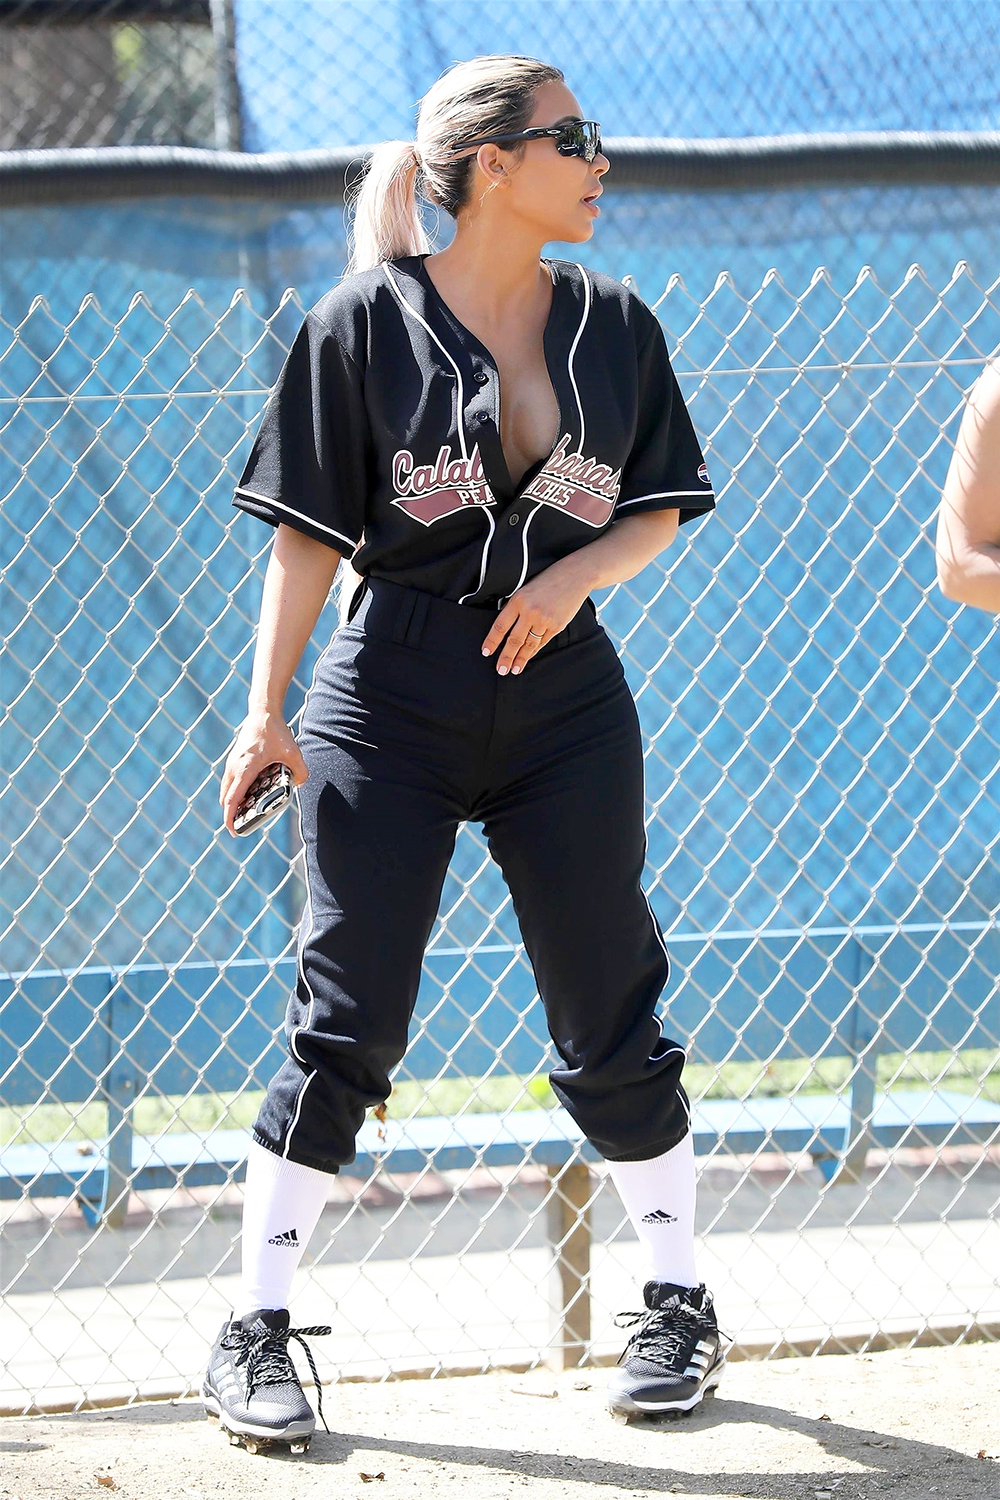 Hilary Duff is all smiles in athletic wear as she grabs lunch on